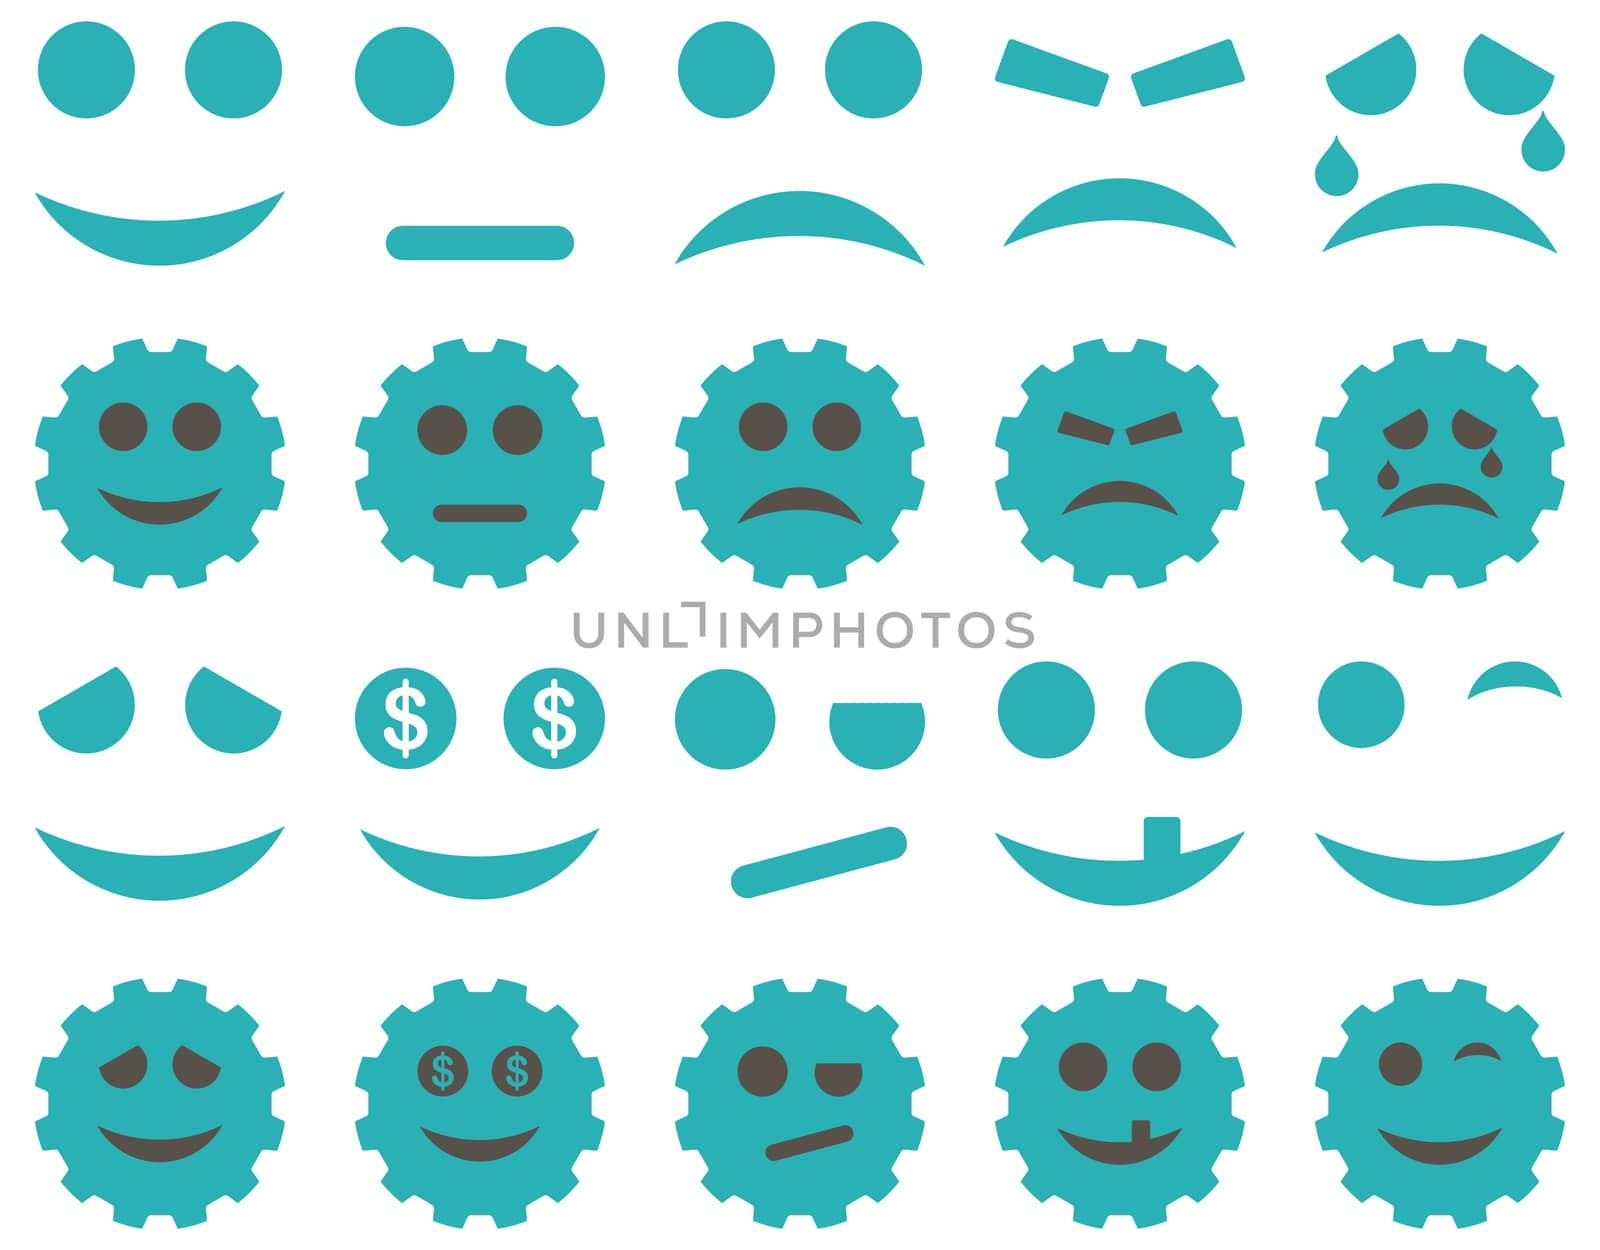 Tools, gears, smiles, emoticons icons. Glyph set style is bicolor flat images, grey and cyan symbols, isolated on a white background.